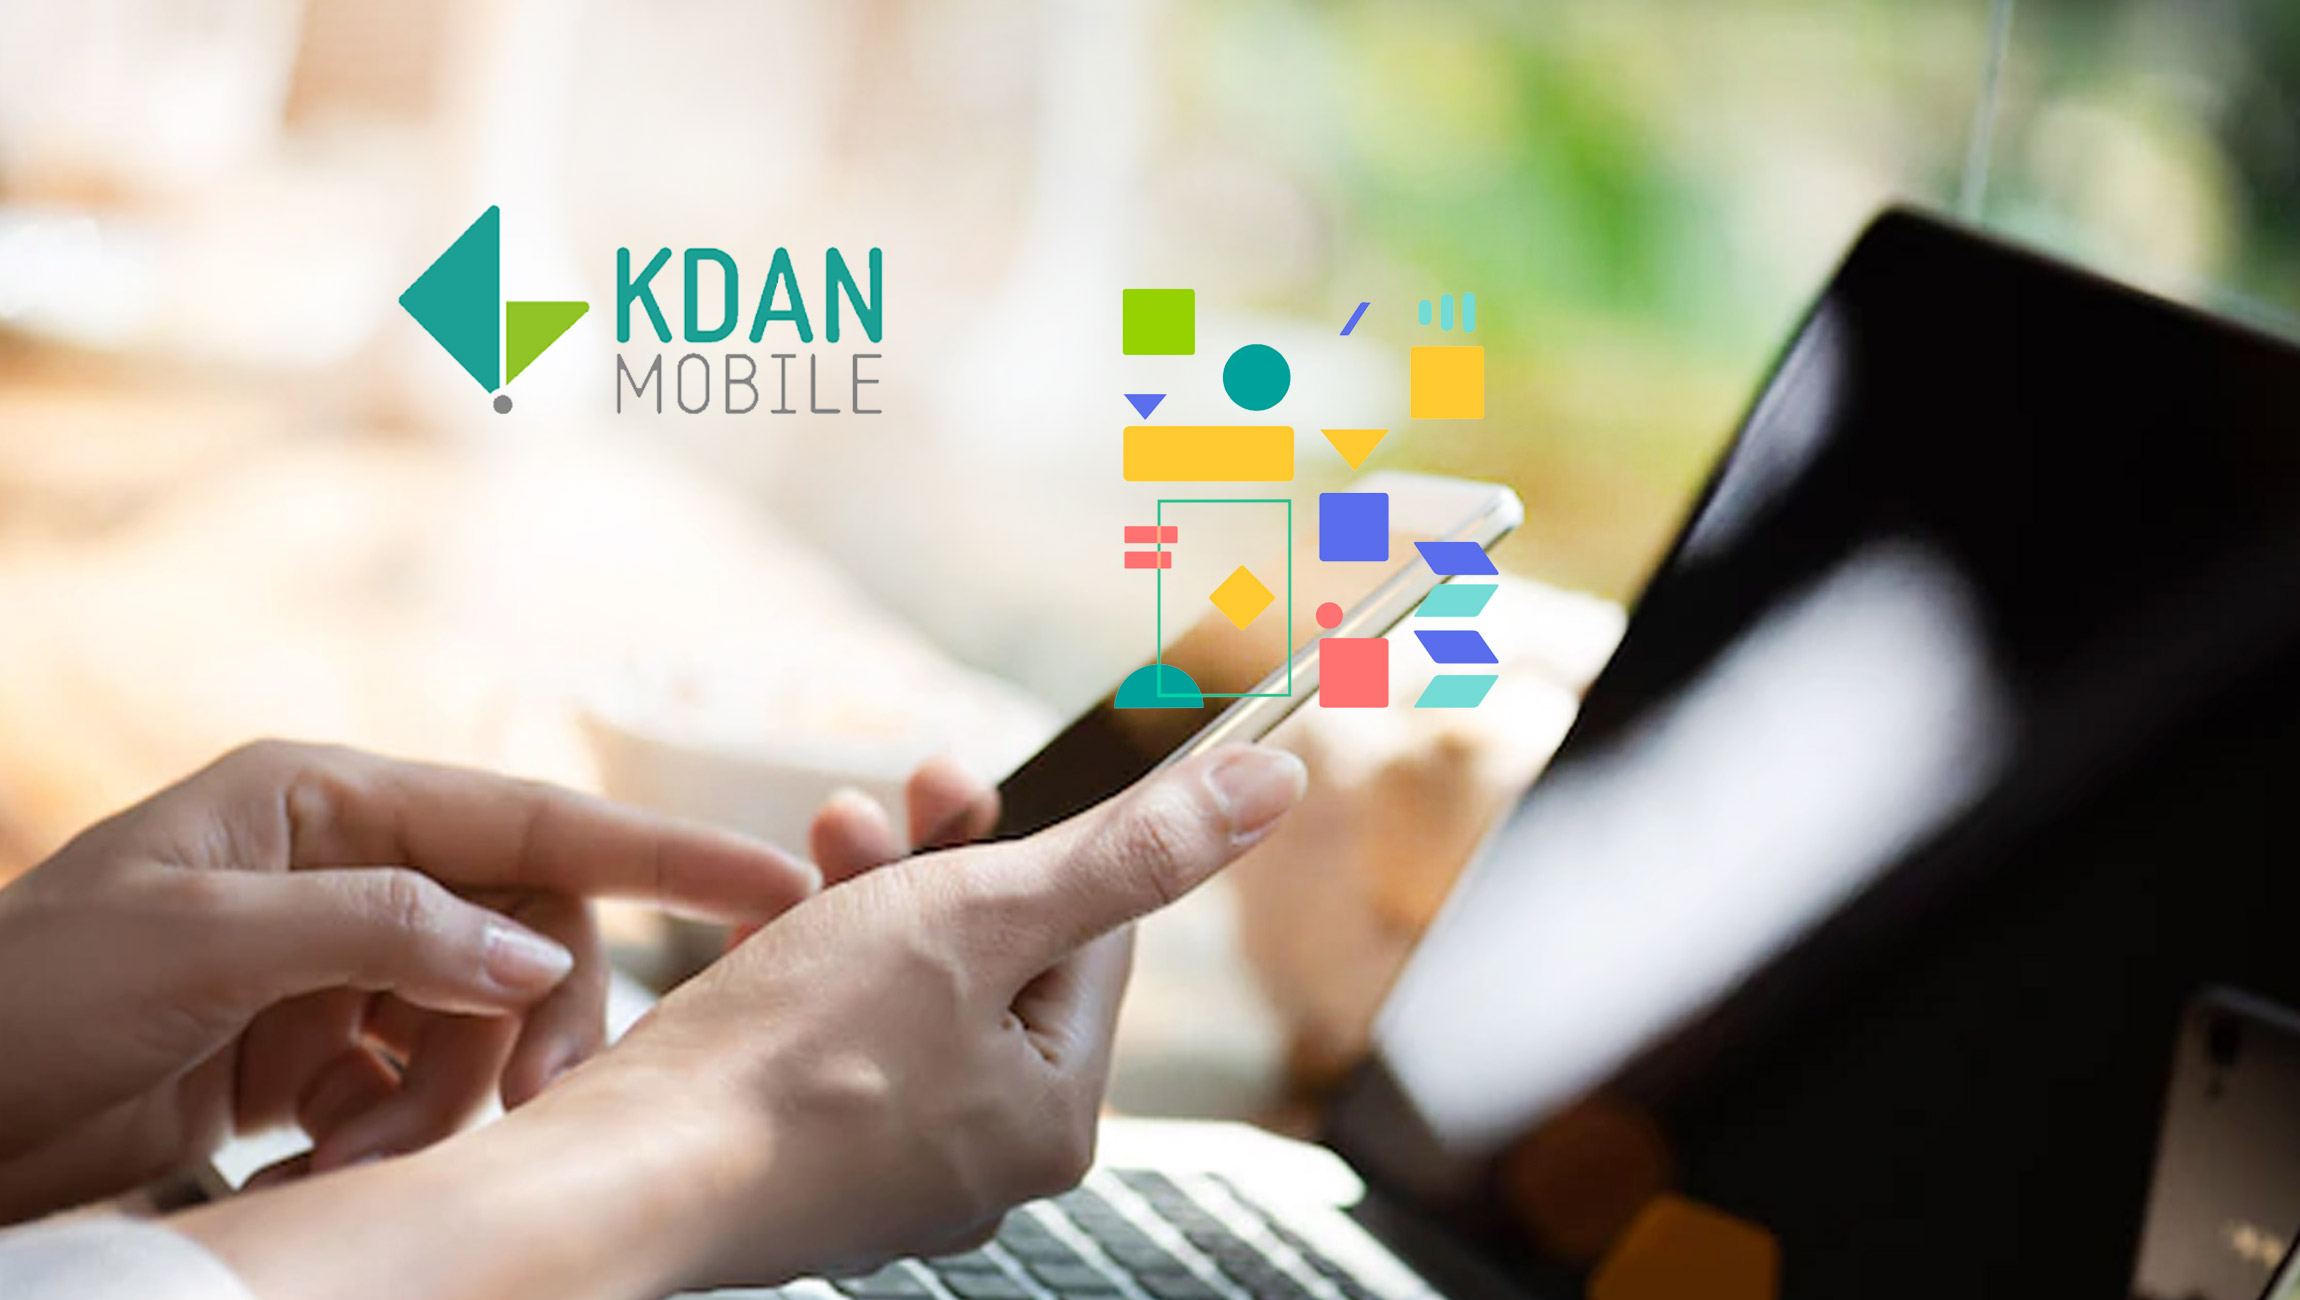 Kdan Mobile Makes Strategic Investment in Toss Lab, Inc. To Expand Global Enterprise Market